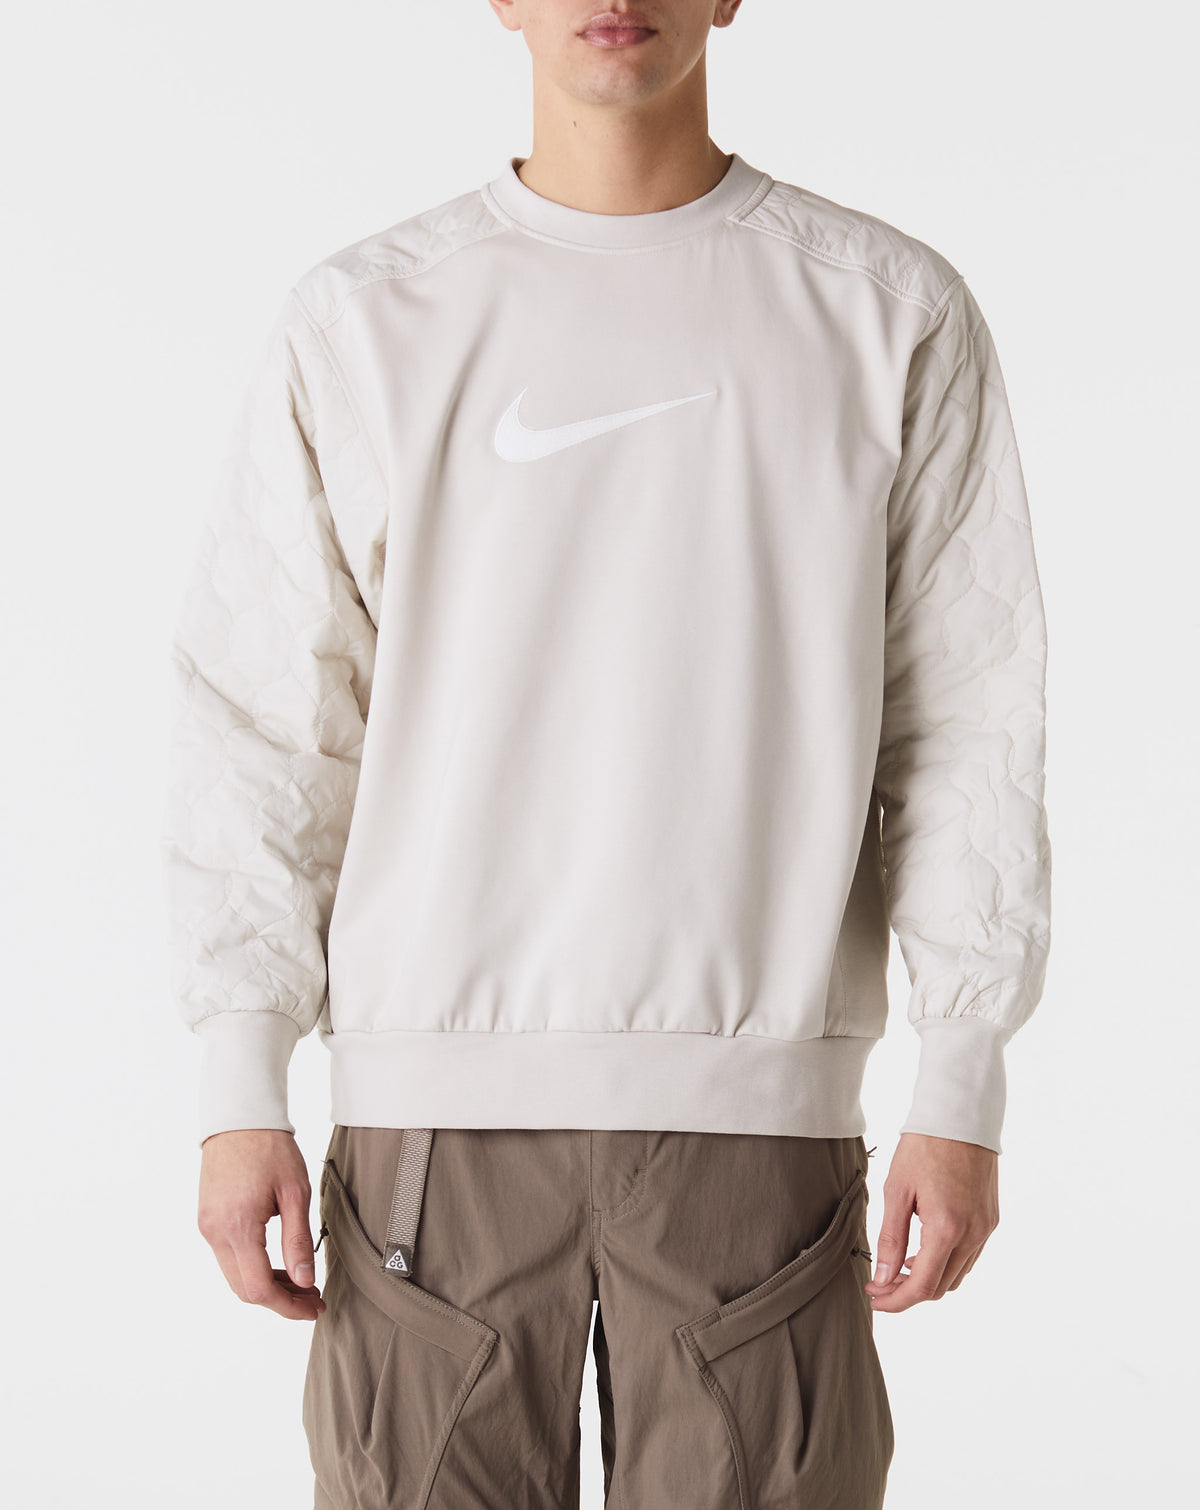 Nike New Age of Sport Basketball Crewneck - Rule of Next Apparel